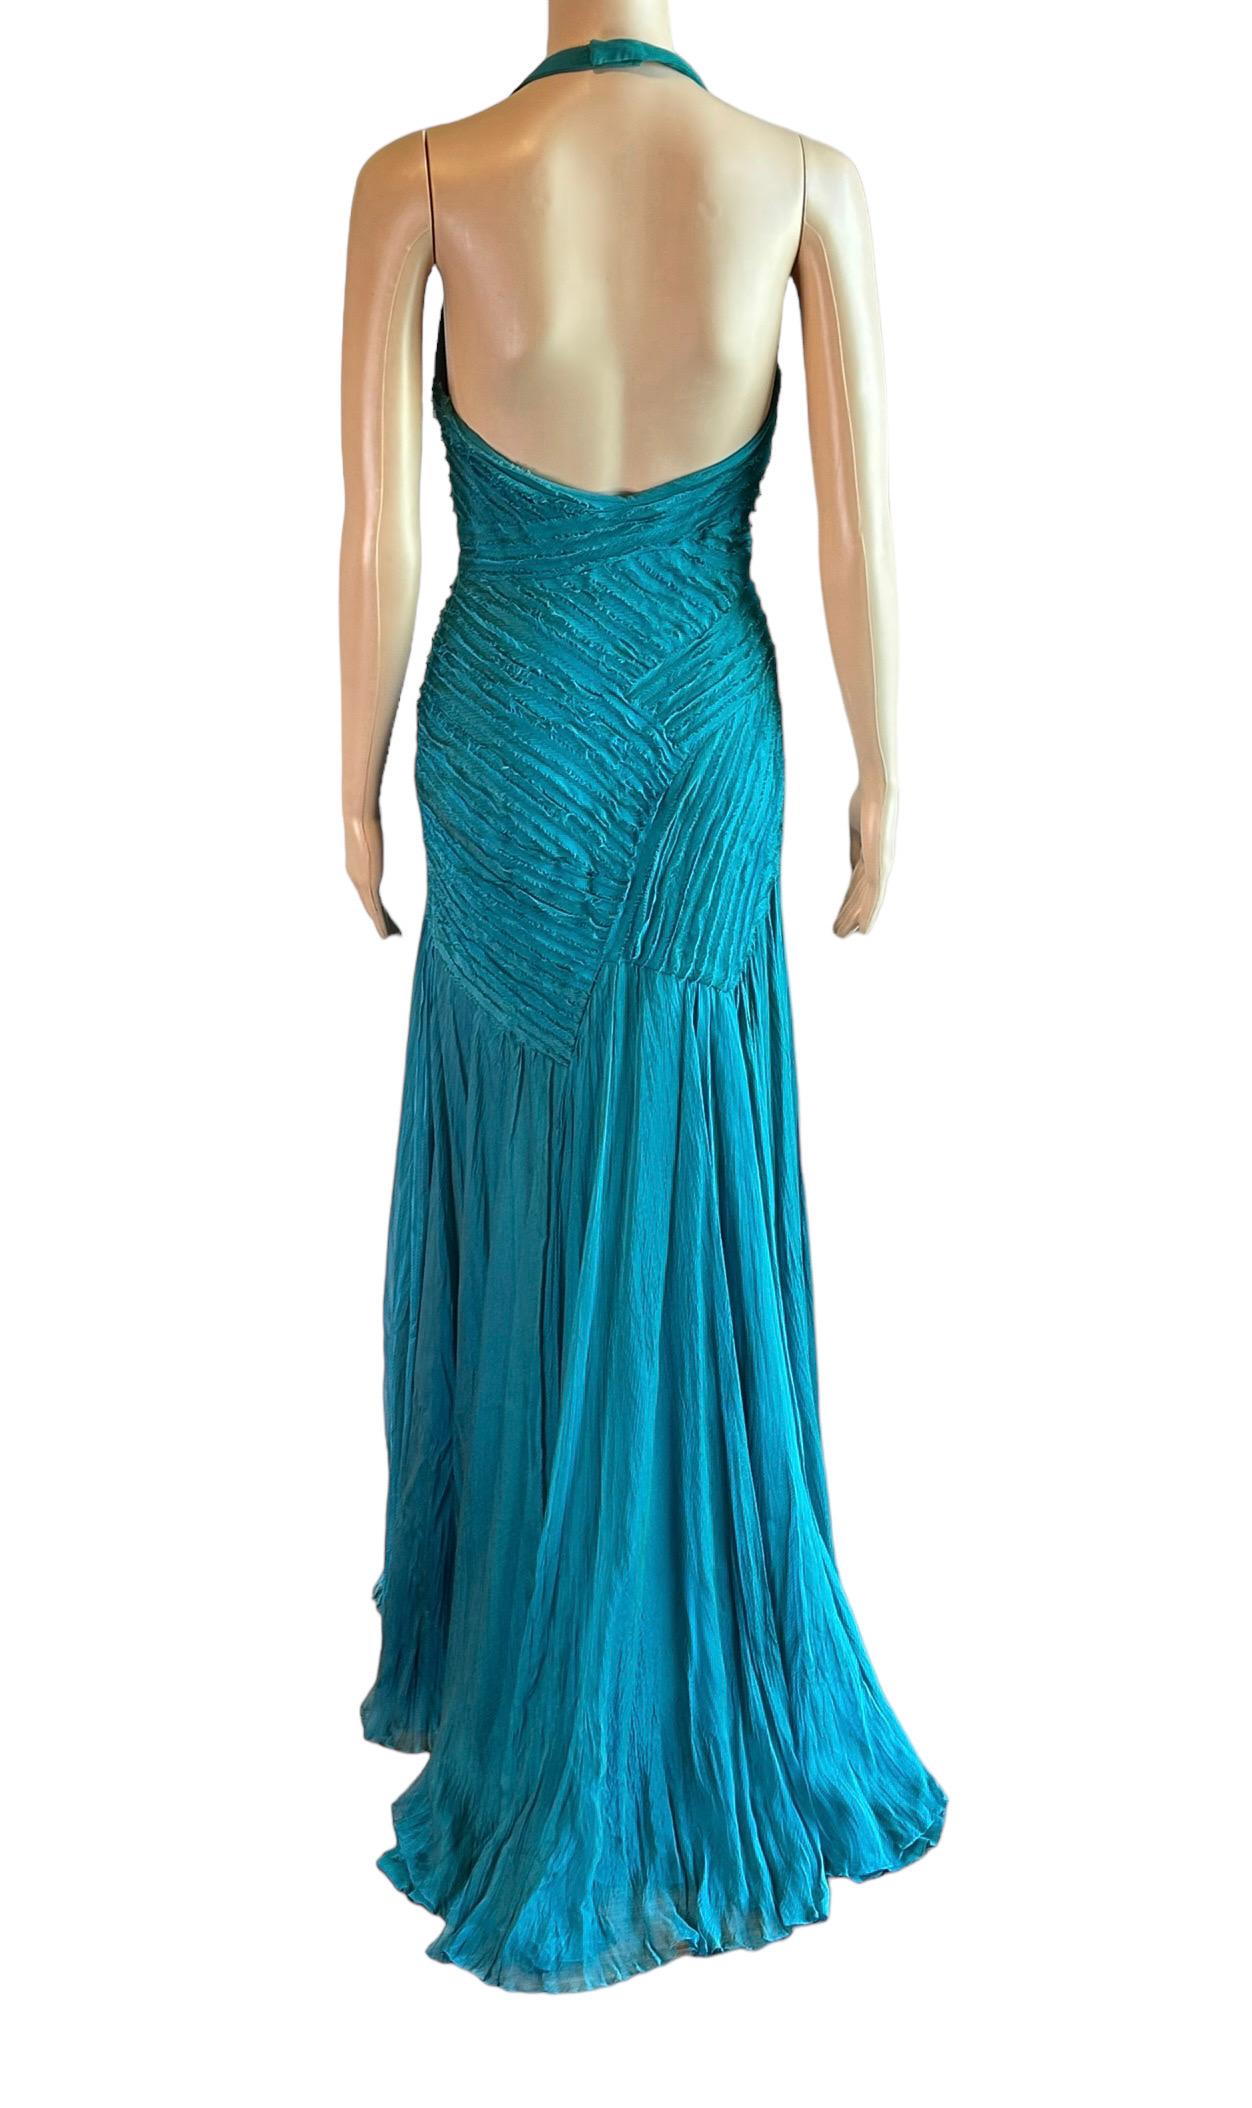 Versace F/W 2005 Runway Campaign Halter High Slit Slip Evening Dress Gown IT 42

Look 49 from the Fall 2005 Collection. 

Featured in the Fall 2005 Campaign.

FOLLOW US ON INSTAGRAM @OPULENTADDICT
